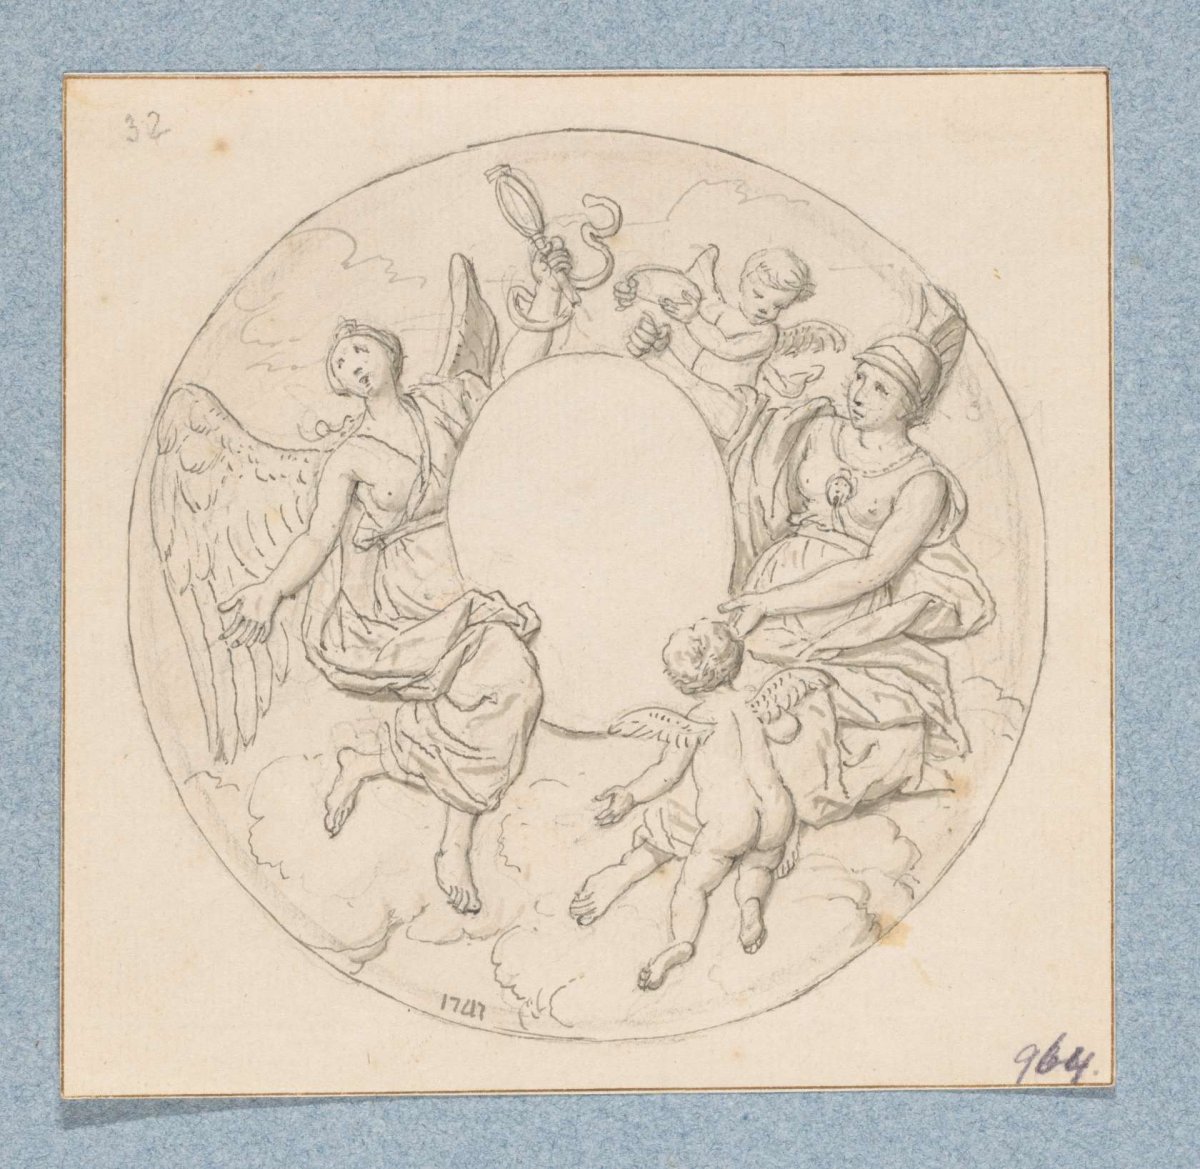 Allegorical cartouche with Prudentia, Minerva and erotes (in box of 43 drawings), Louis Fabritius Dubourg, 1747